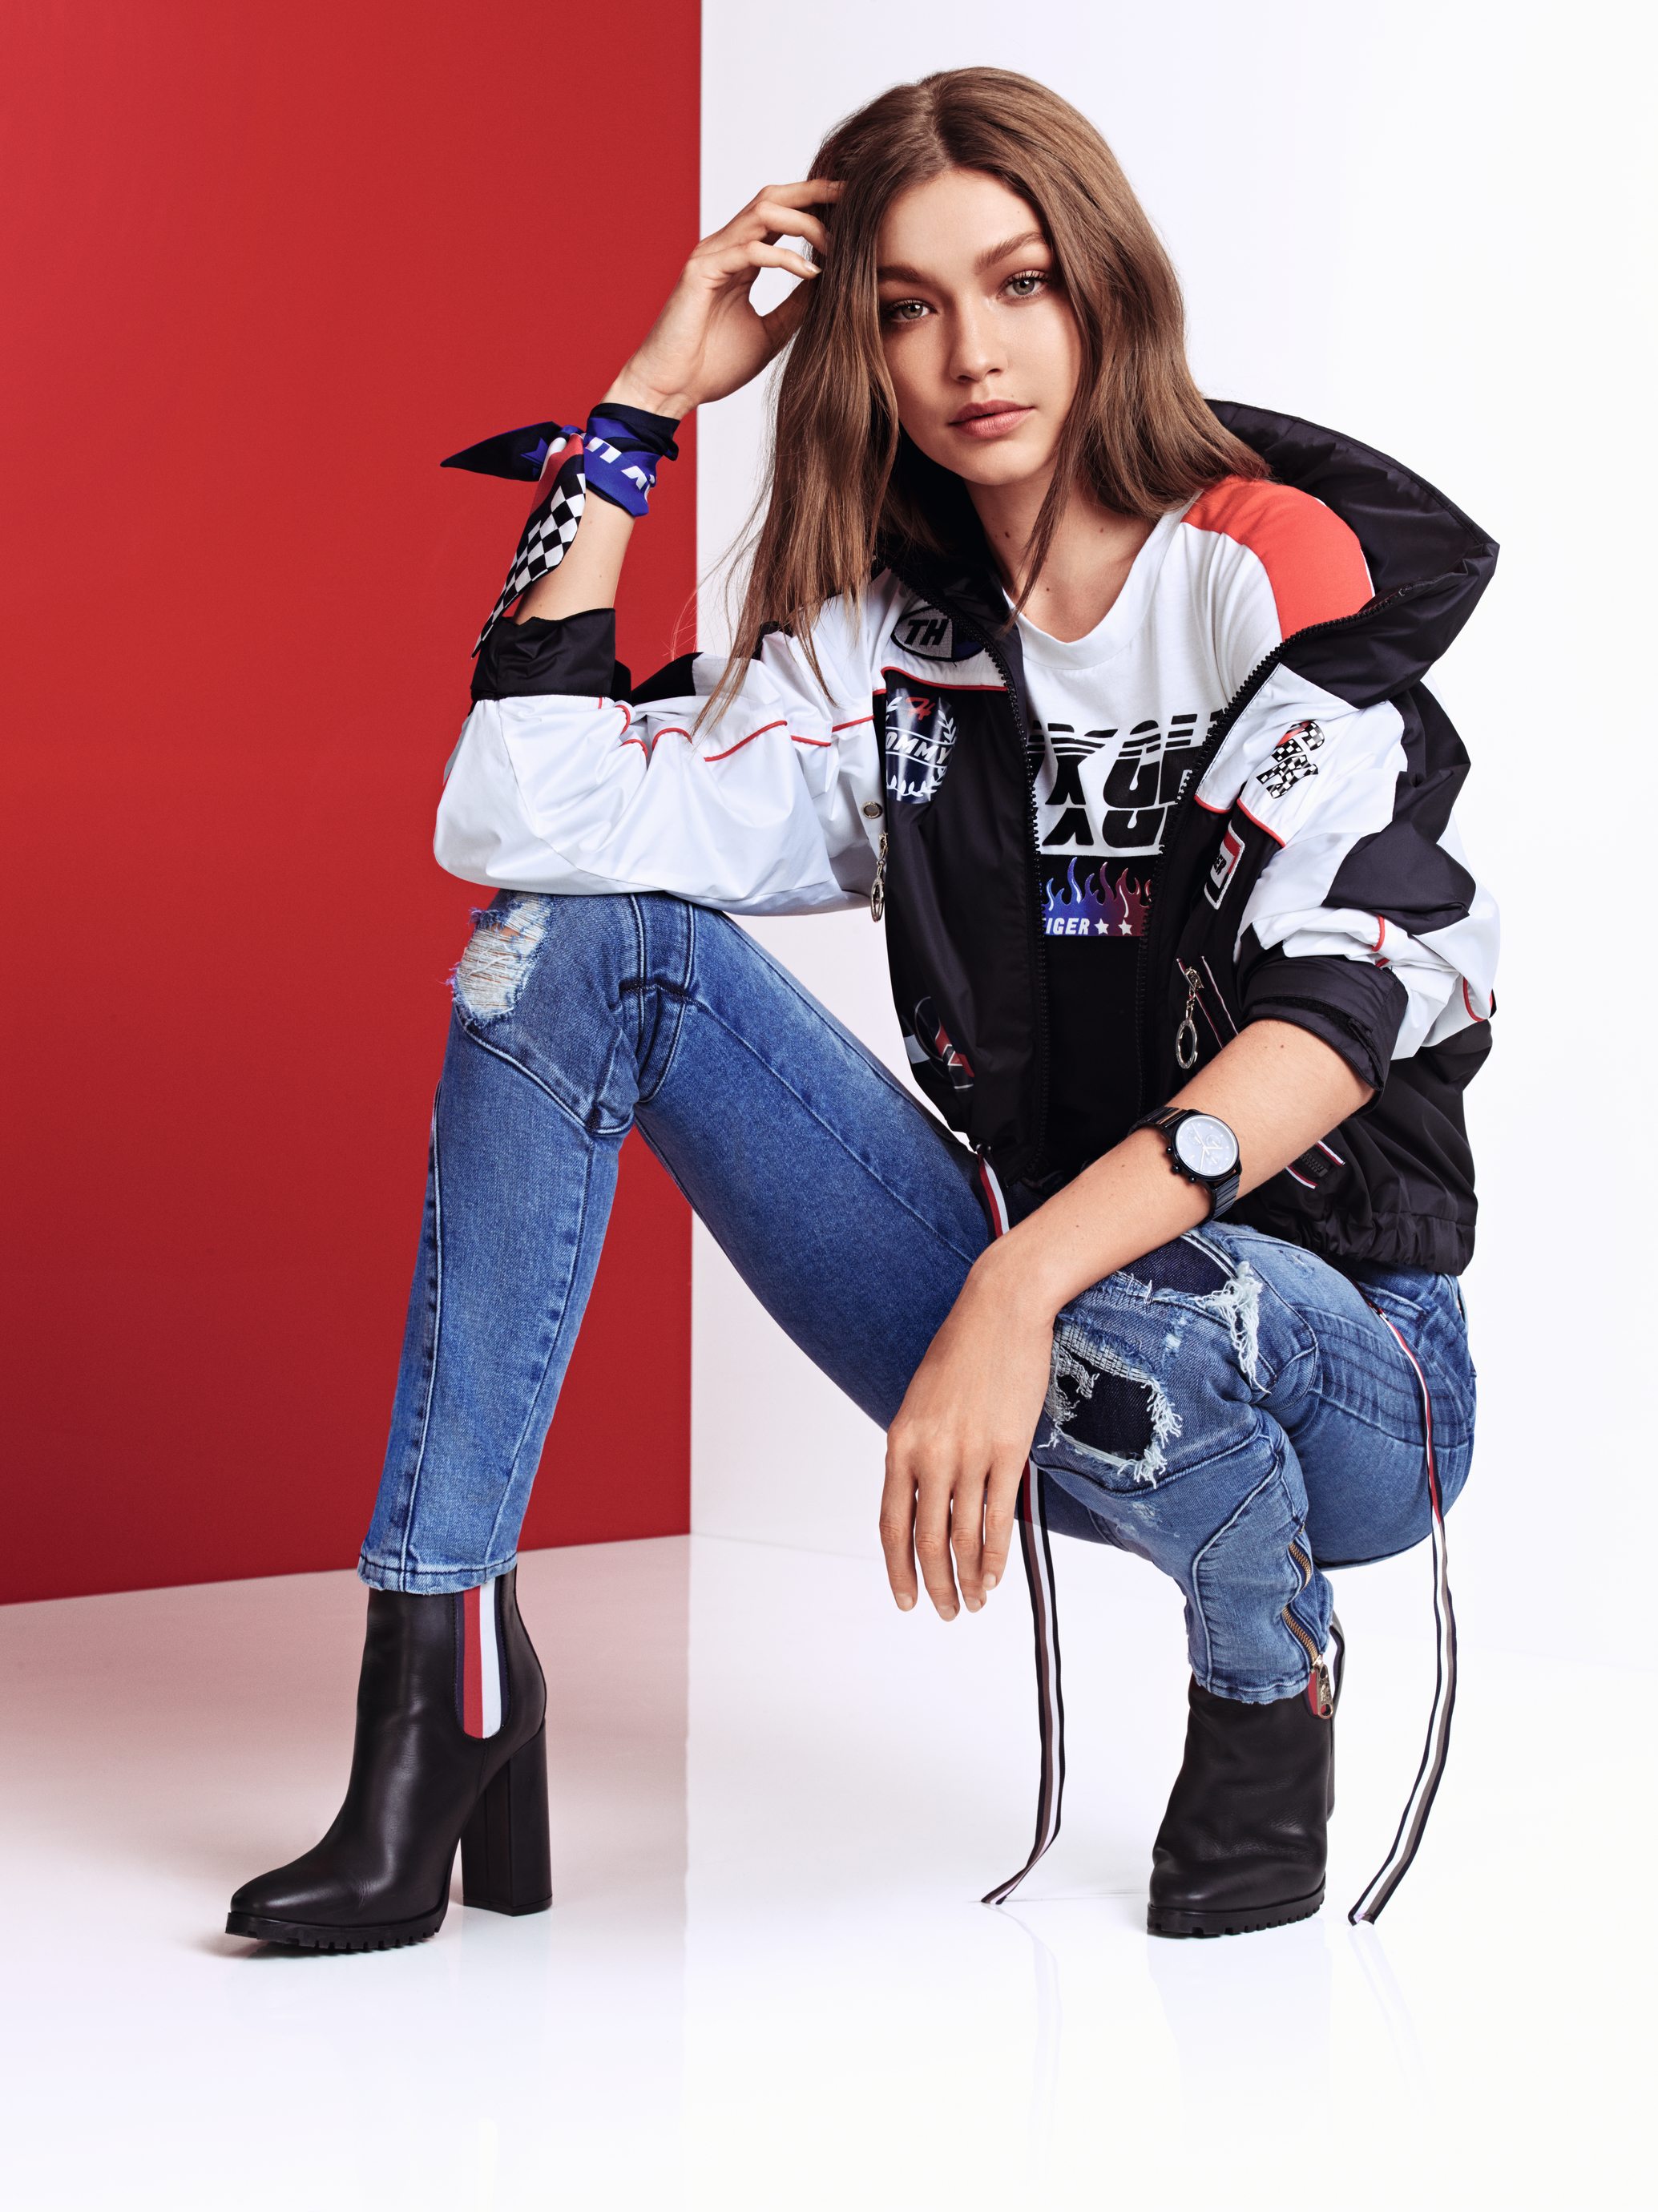 Gigi Hadid x Tommy Launch New Speed-Inspired Collection - FASHION Magazine